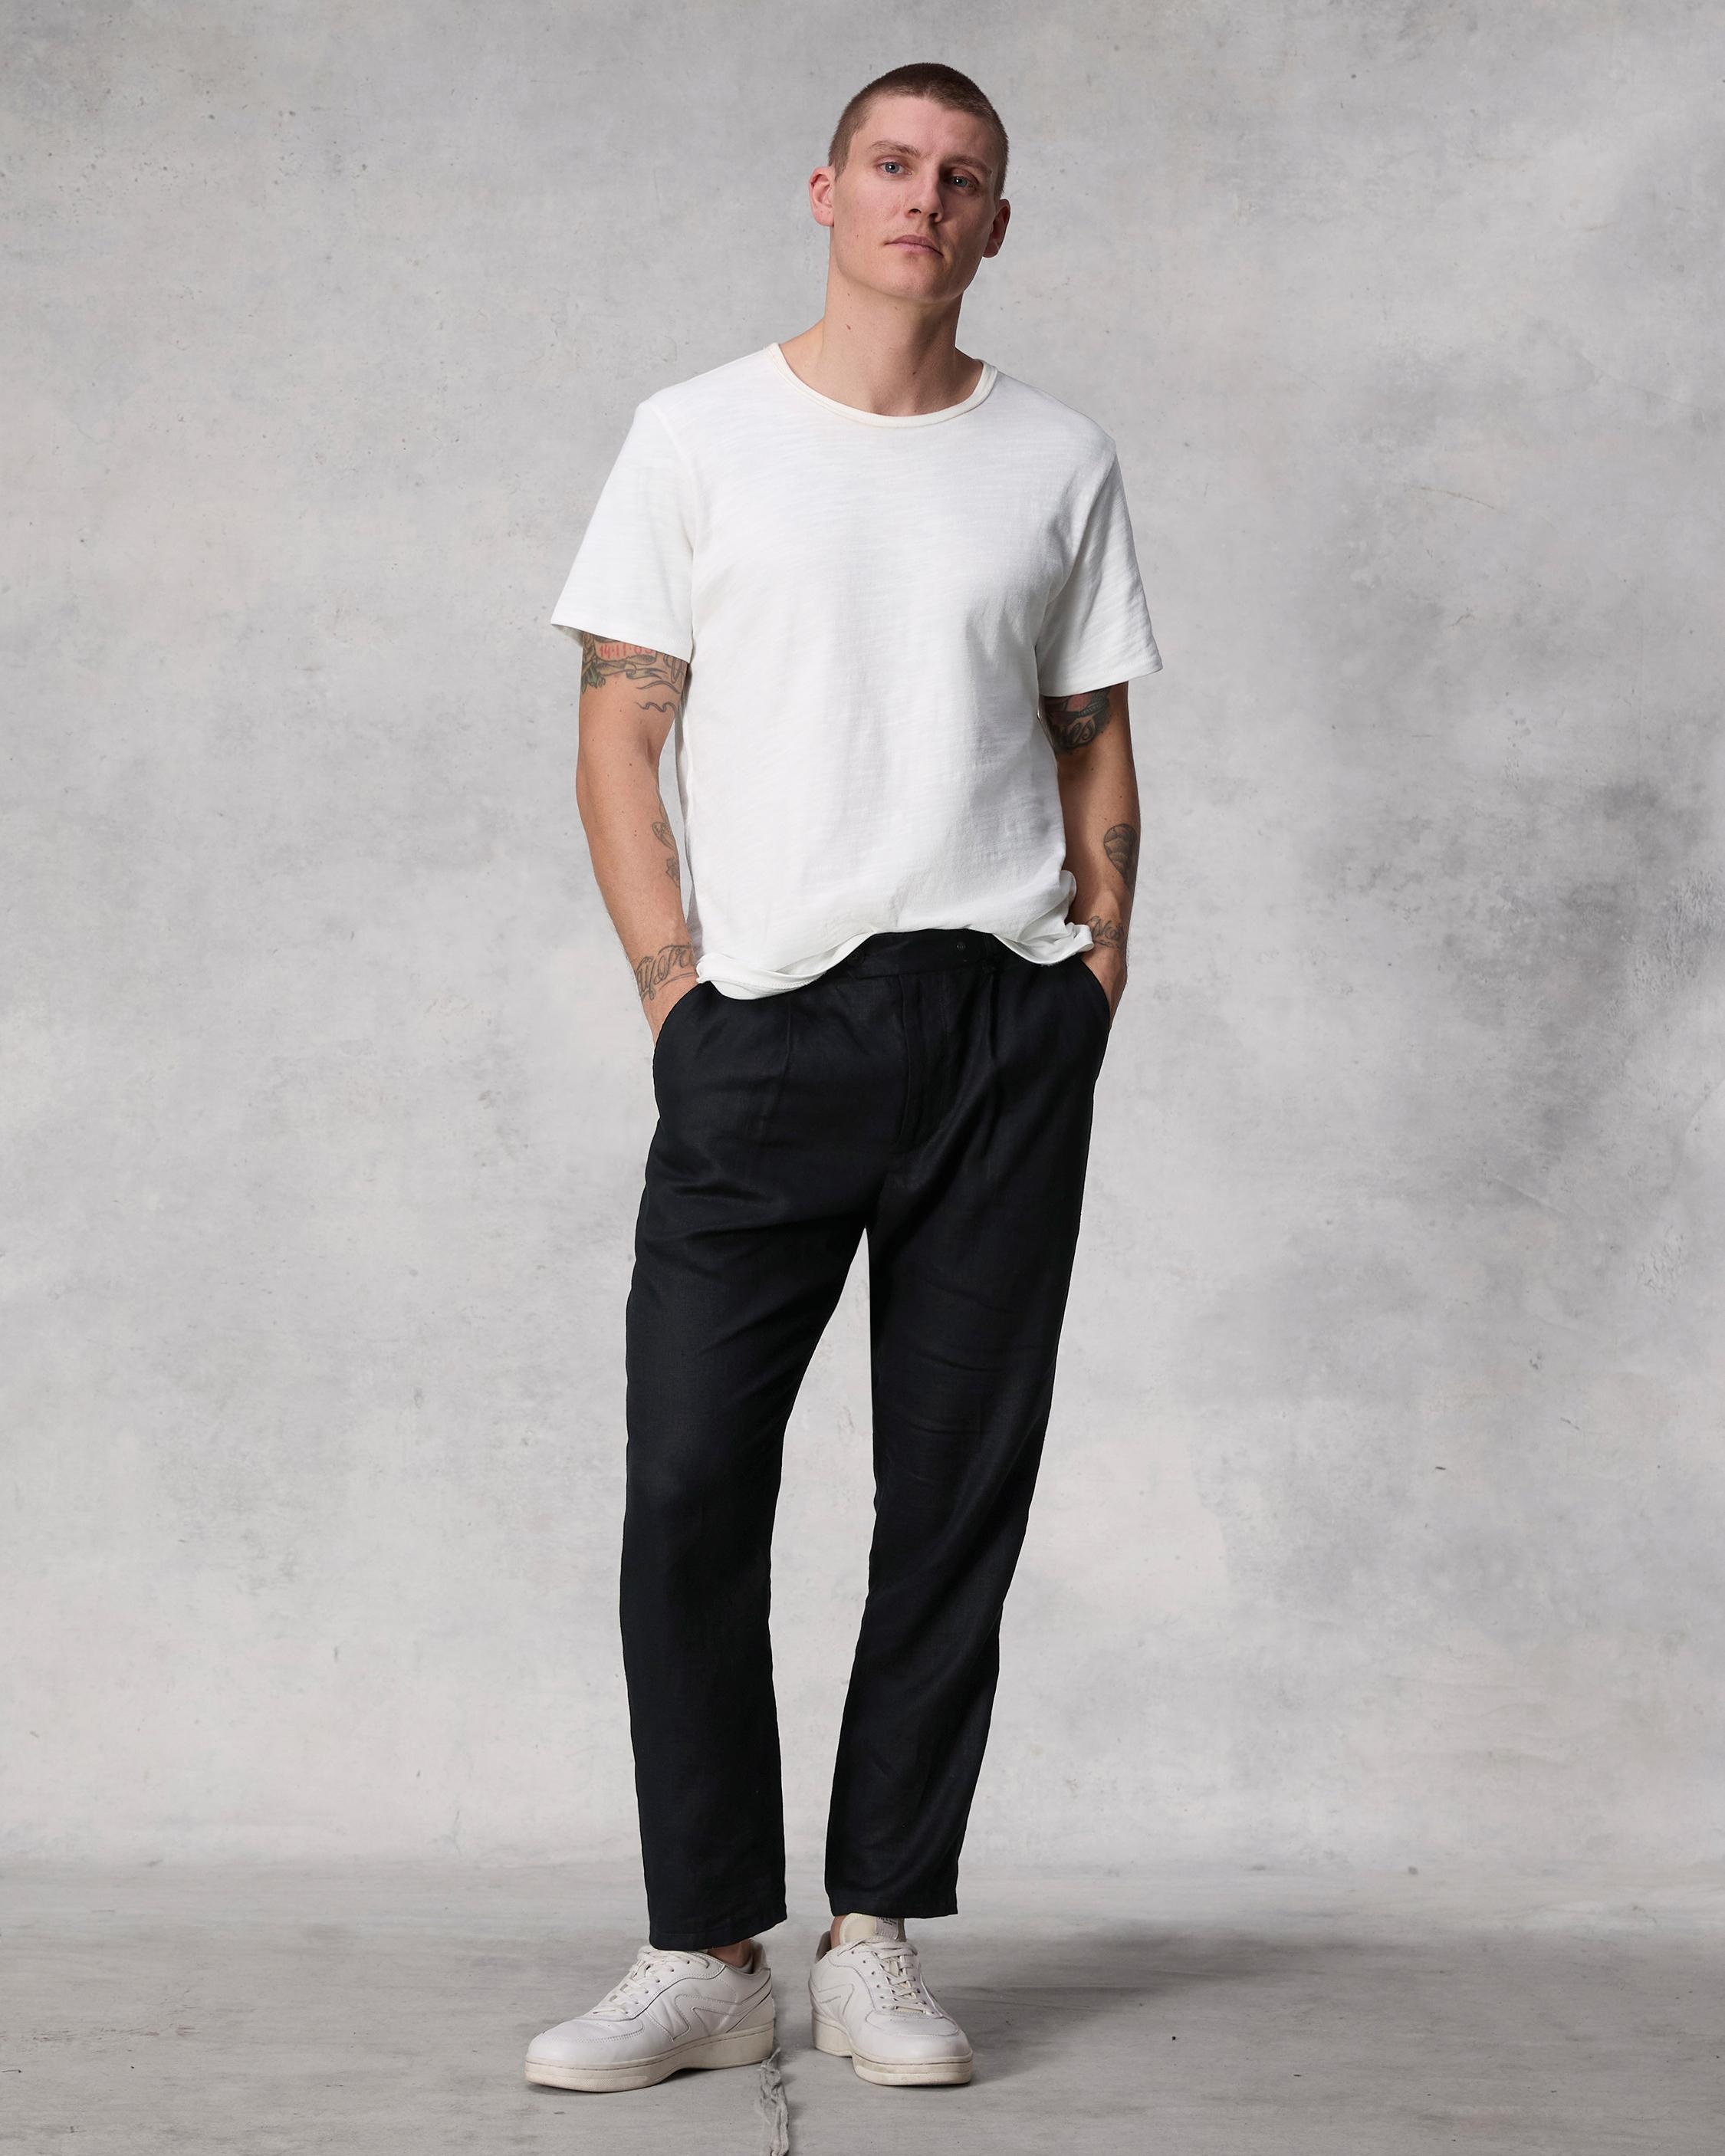 Pleated Linen Chino
Slim Fit - 2